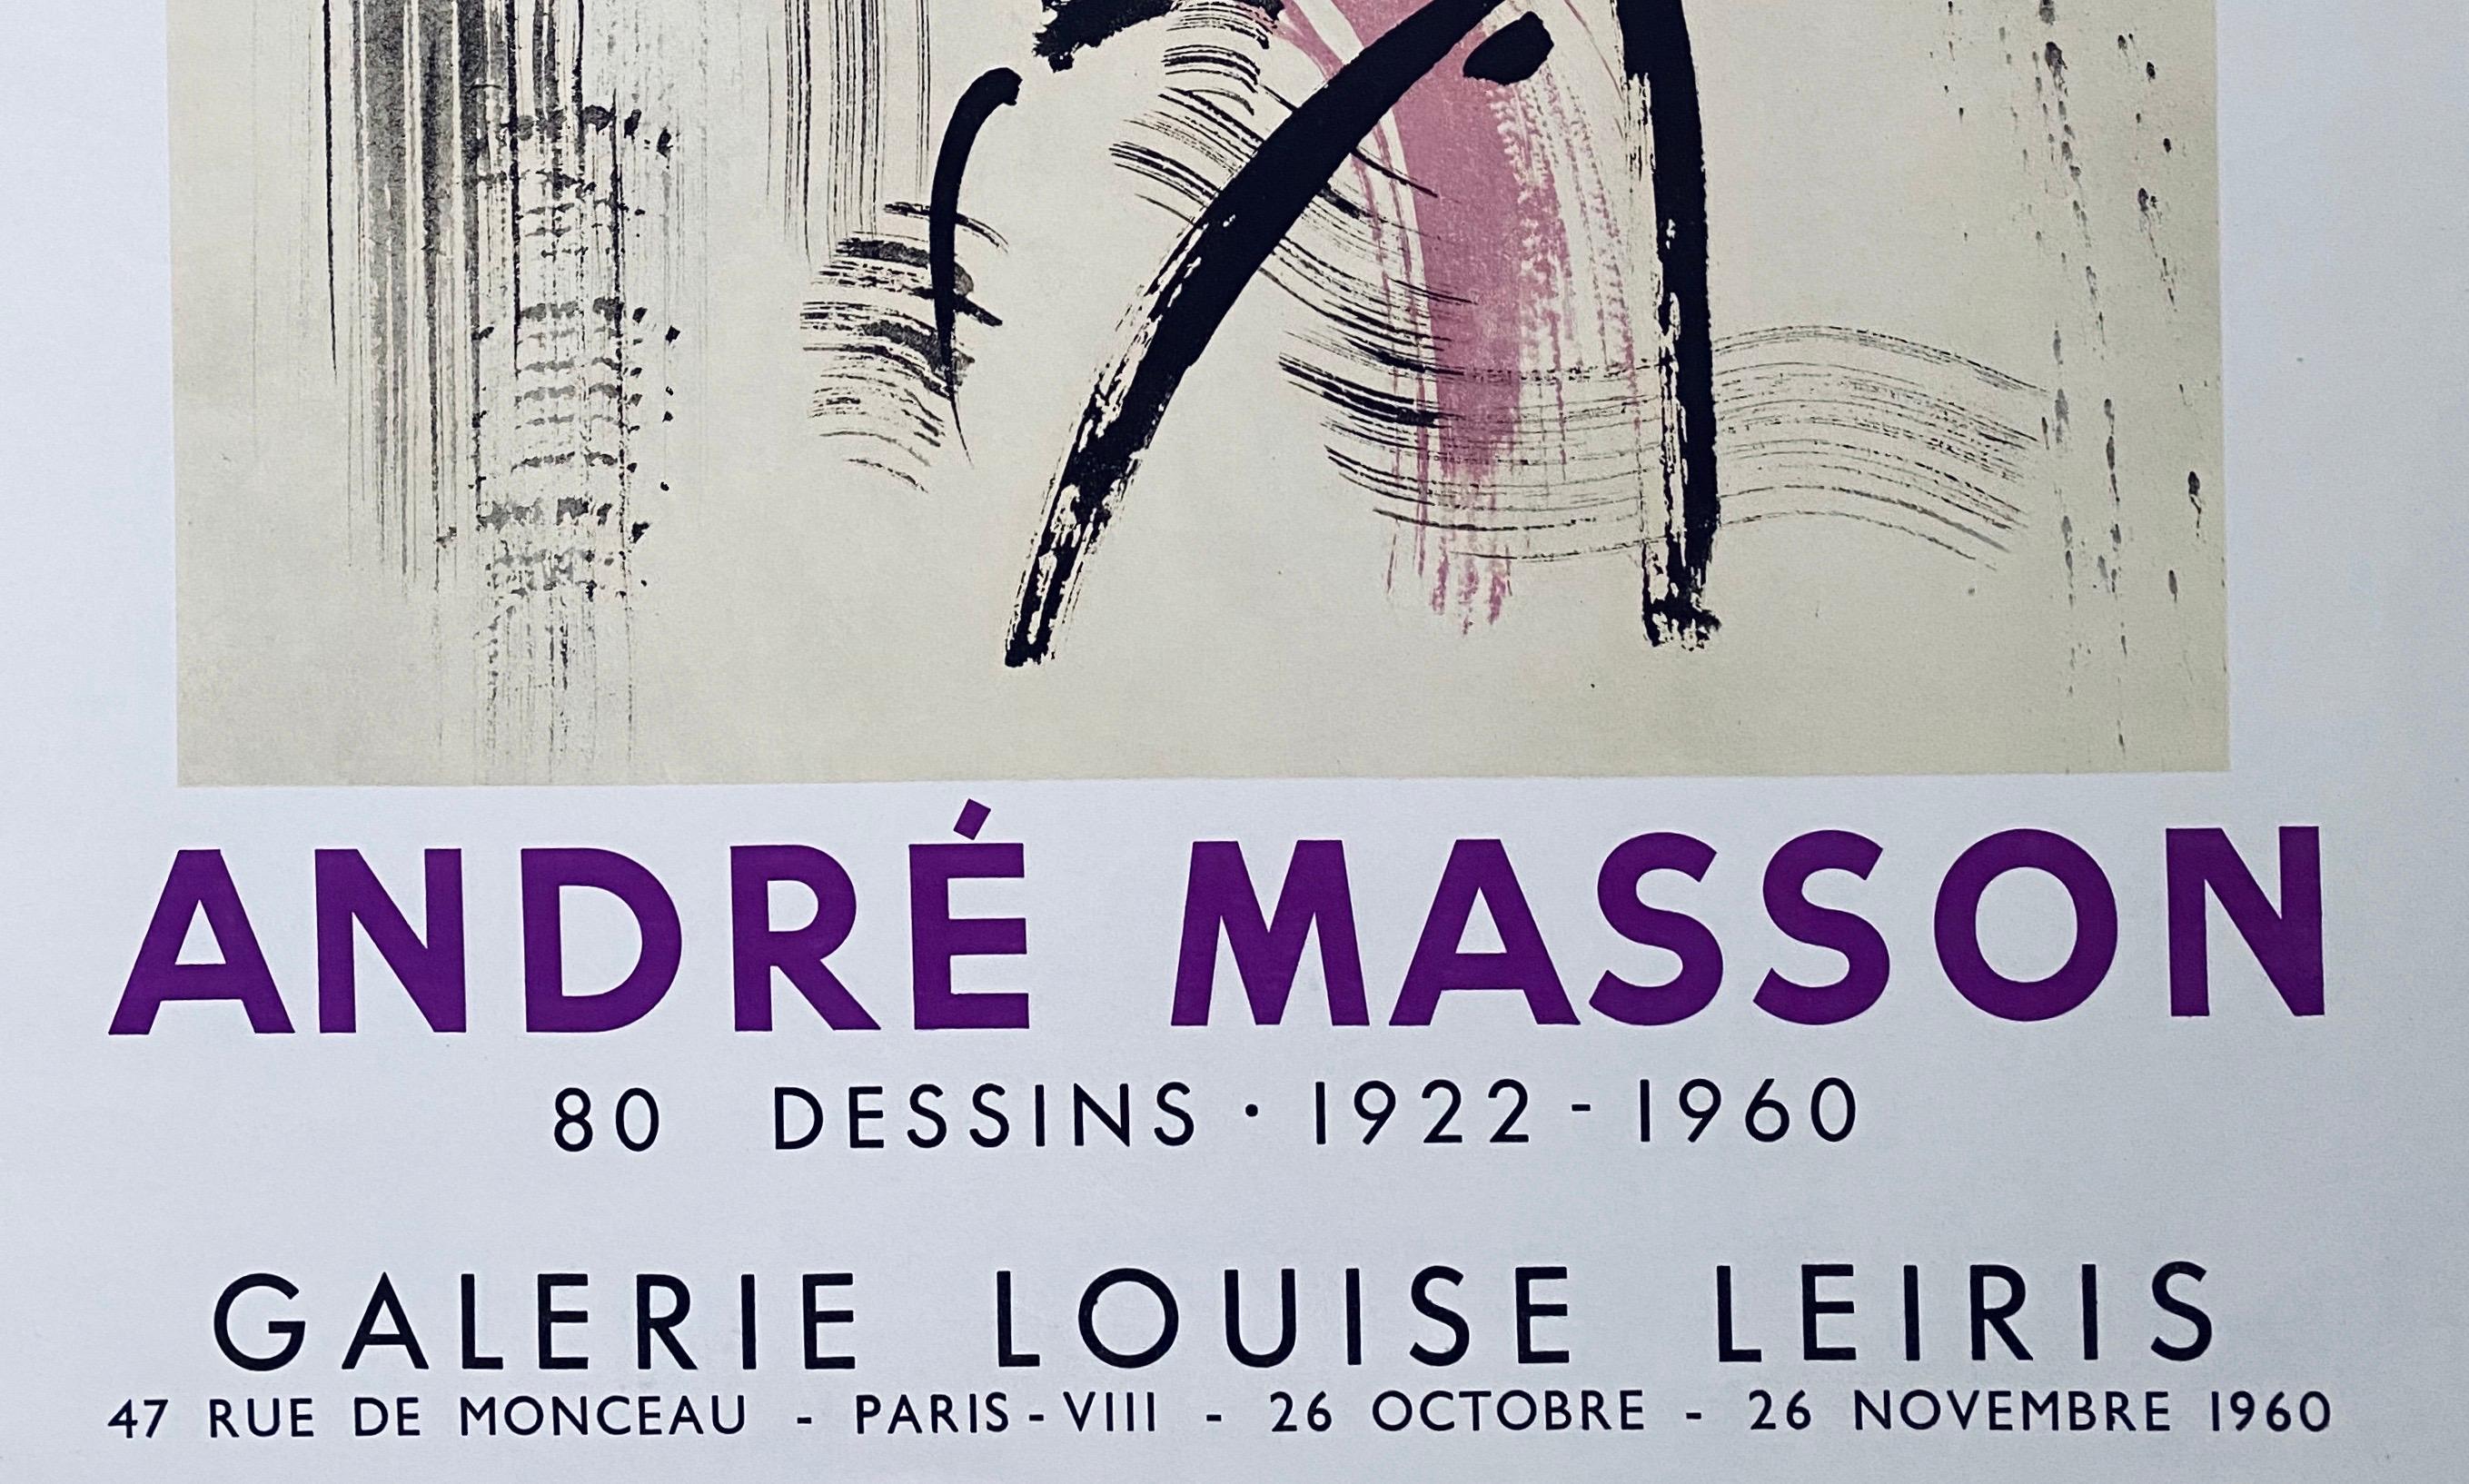 André-Aimé-René Masson (4 January 1896 – 28 October 1987) was a French artist.

Masson was born in Balagny-sur-Thérain, Oise, but when he was eight his father's work took the family first briefly to Lille and then to Brussels. He began his study of